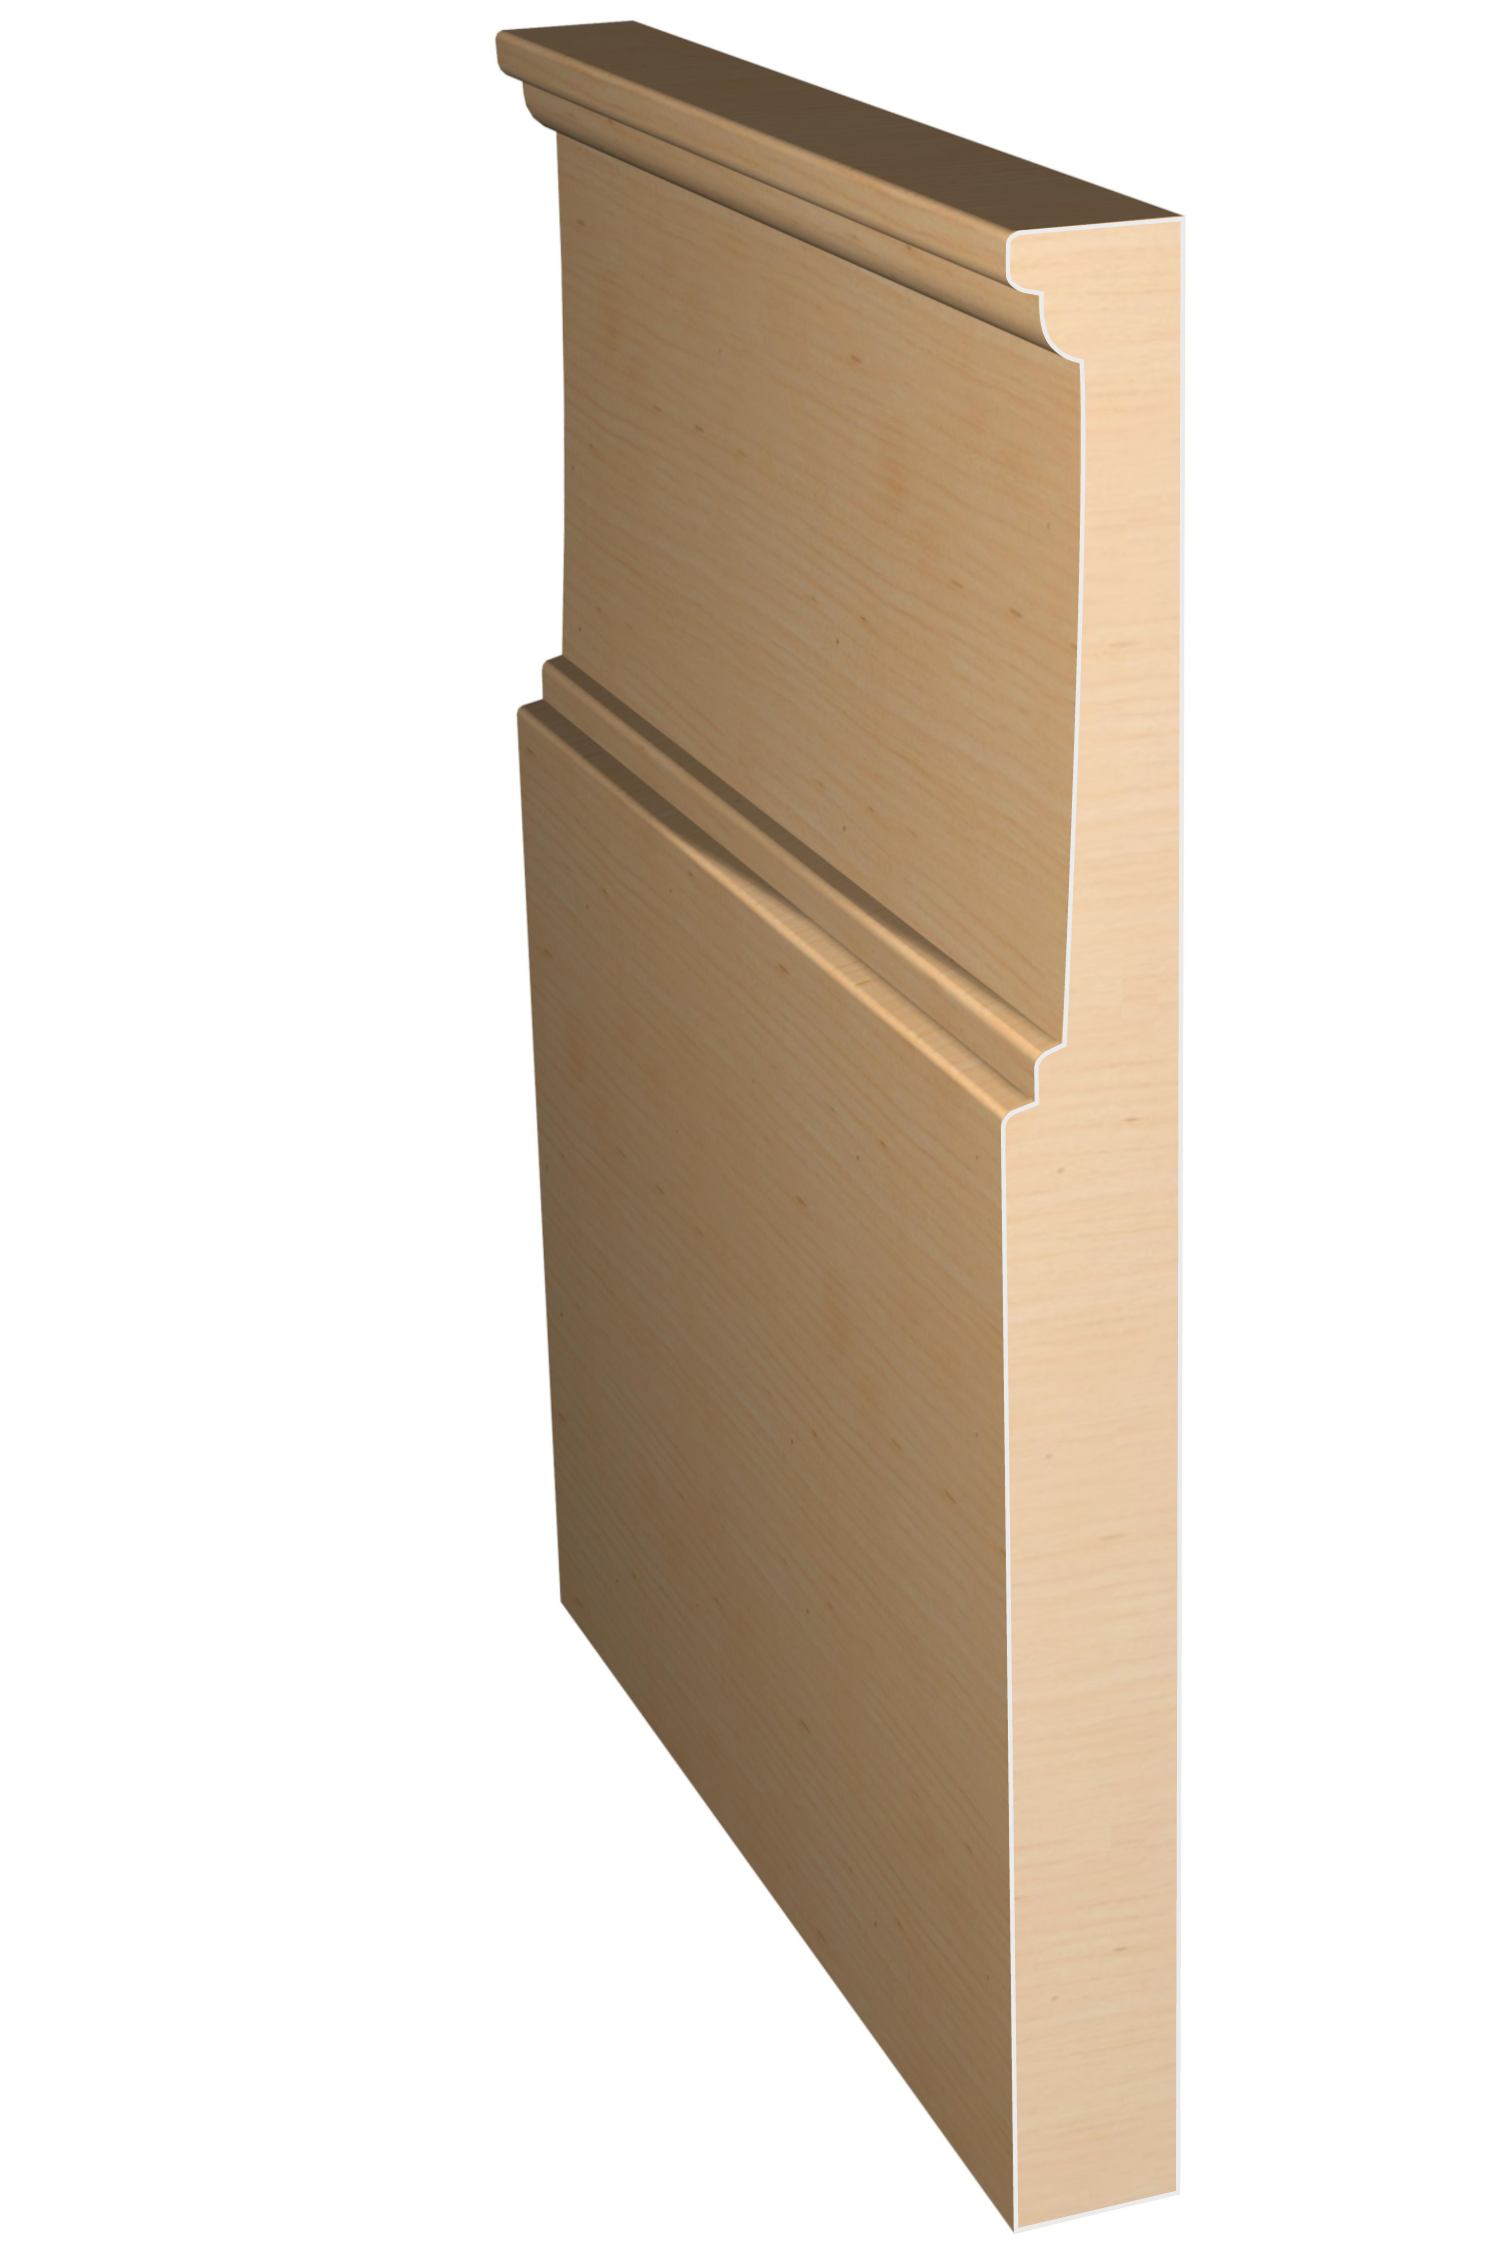 Three dimensional rendering of custom base wood molding BAPL94 made by Public Lumber Company in Detroit.